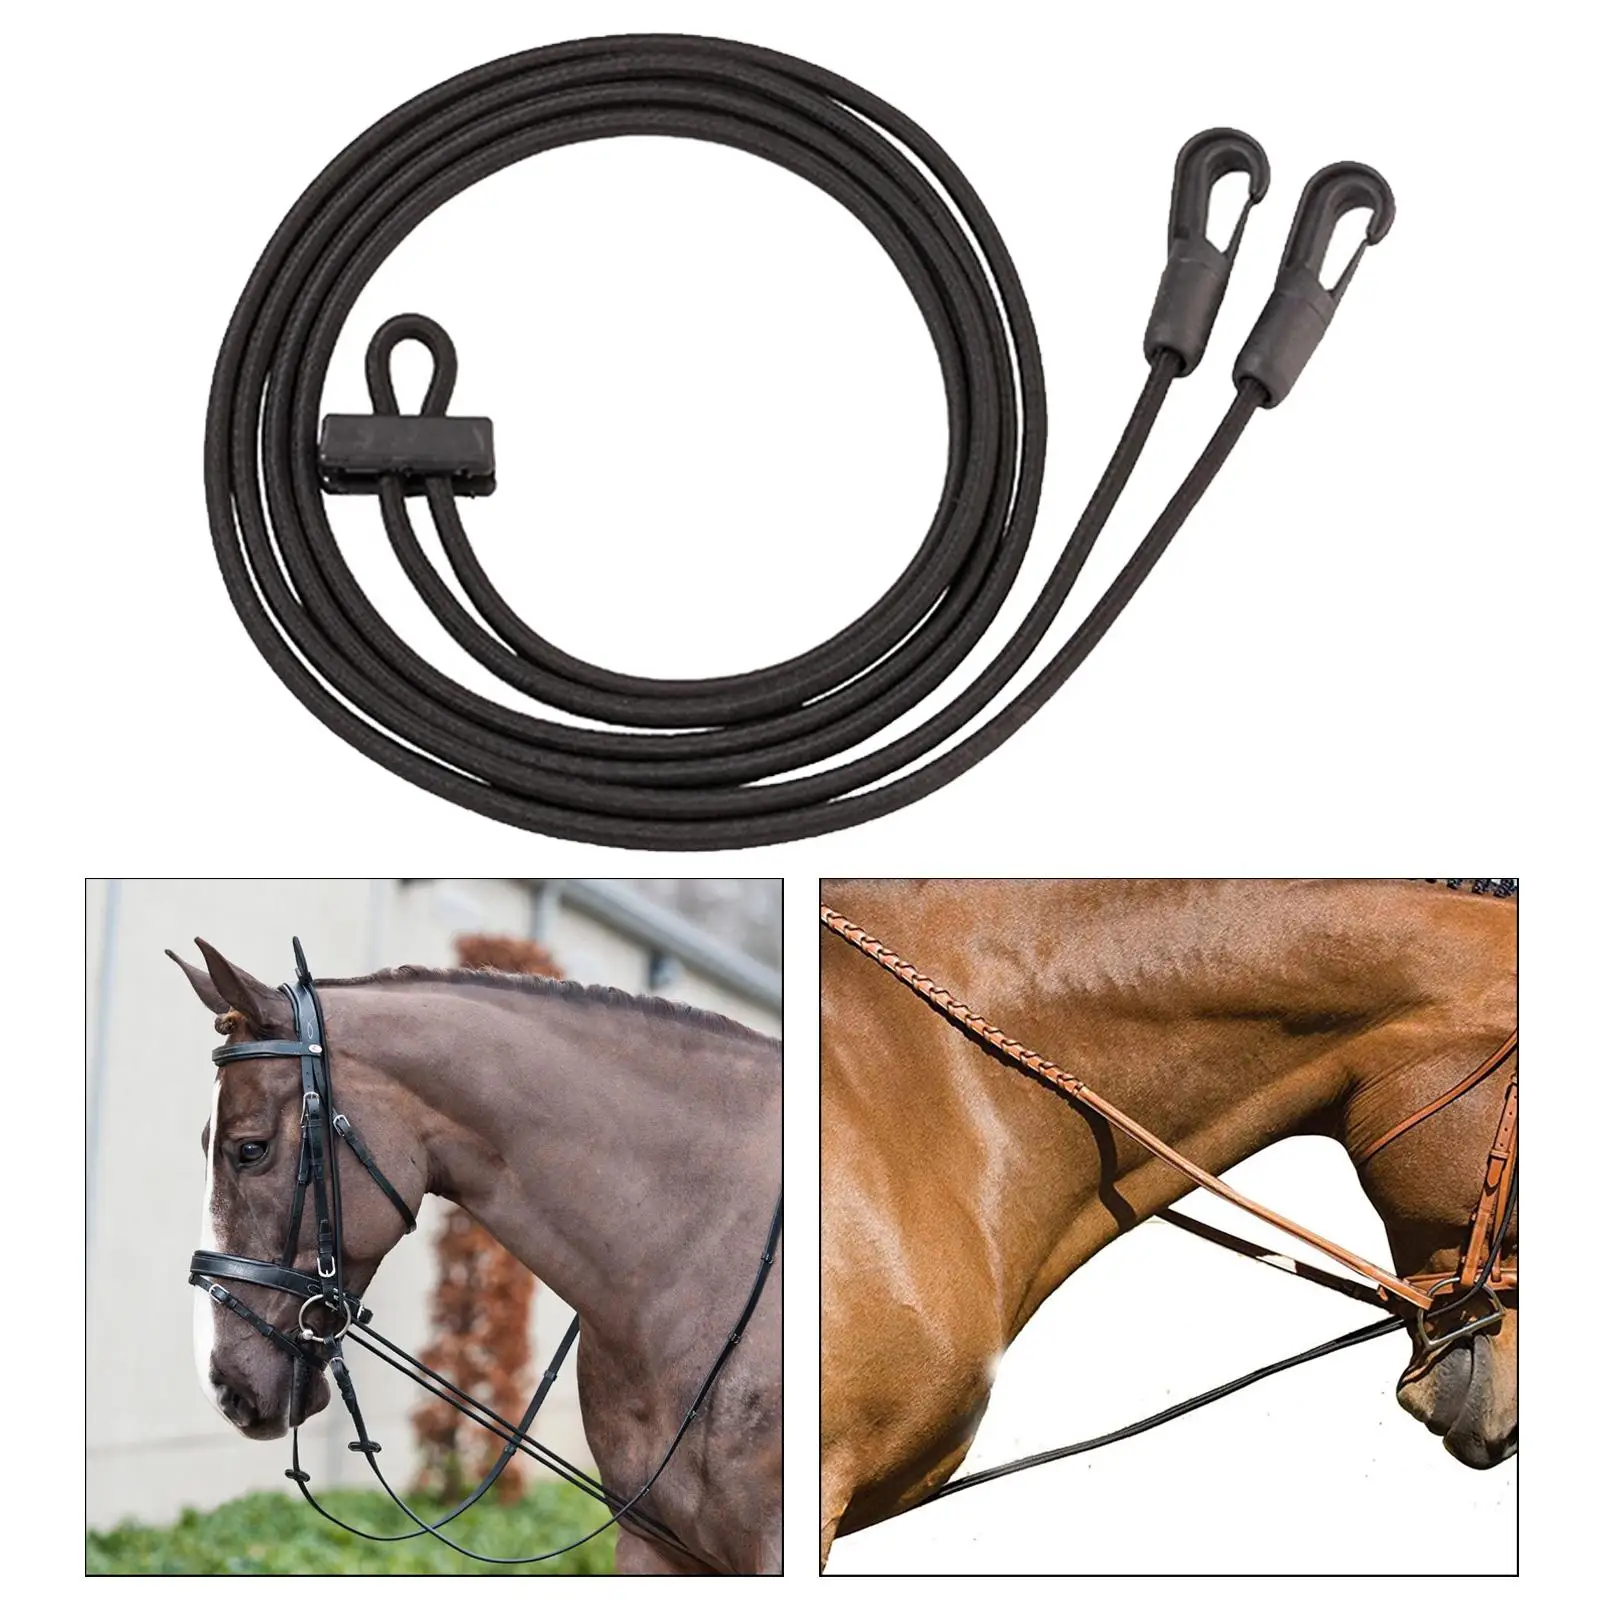 3 Roping Reins, Training Rope Comfortable Adjustable stretcher fo neck for Racecourse Correct Aid   Horse Horses Equipment